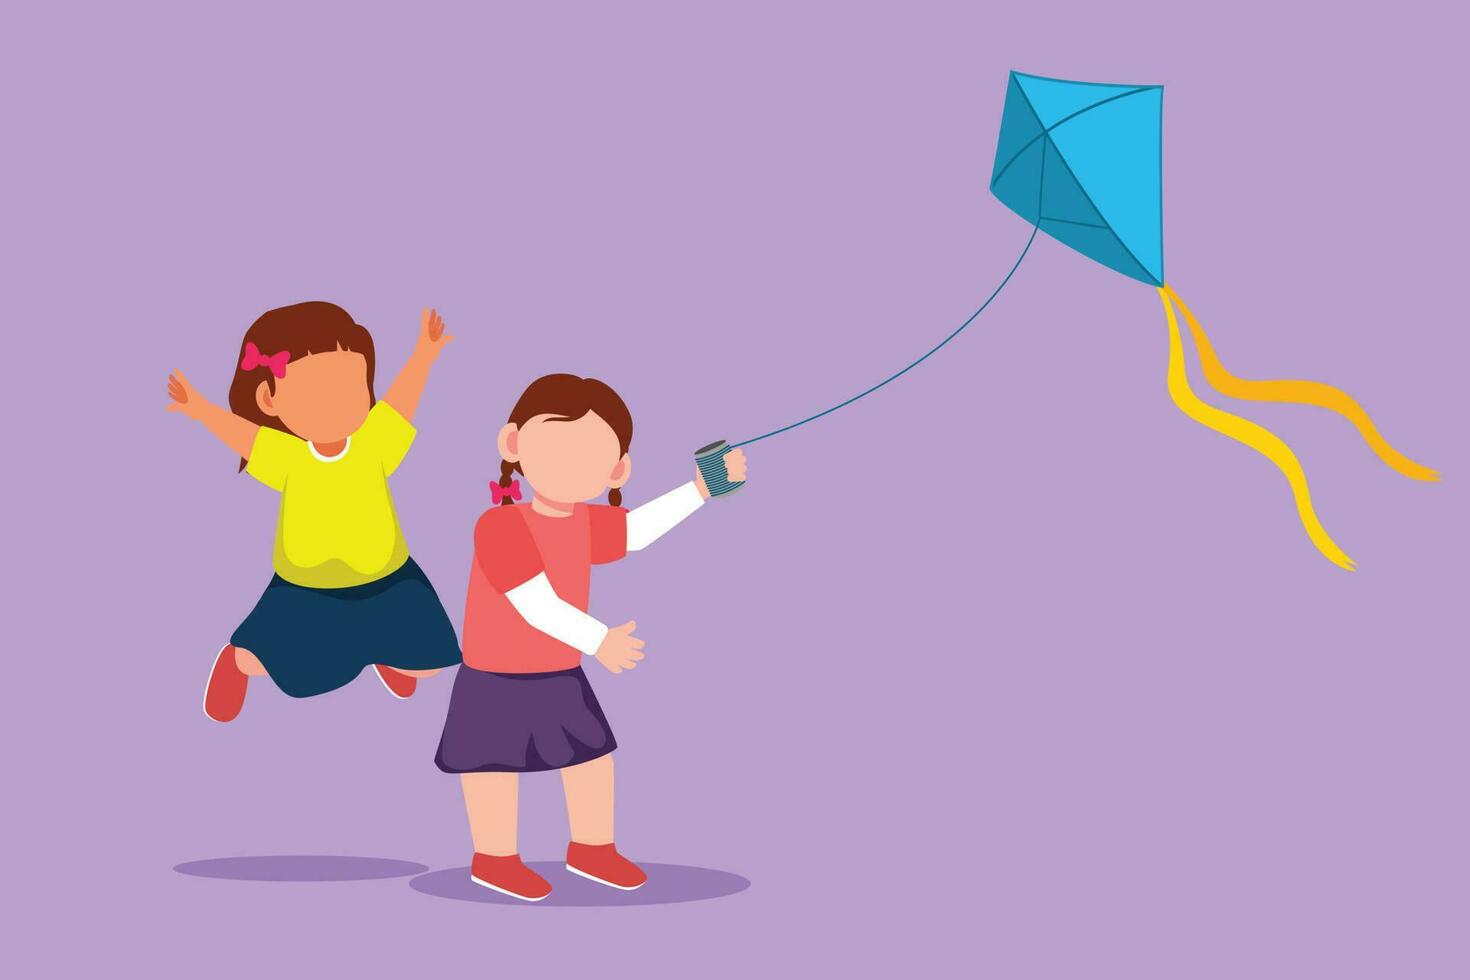 Graphic flat design drawing two girl playing to fly kite up into sky at outdoor field. Kids playing kite in playground. Children with kites game and they look happy. Cartoon style vector illustration